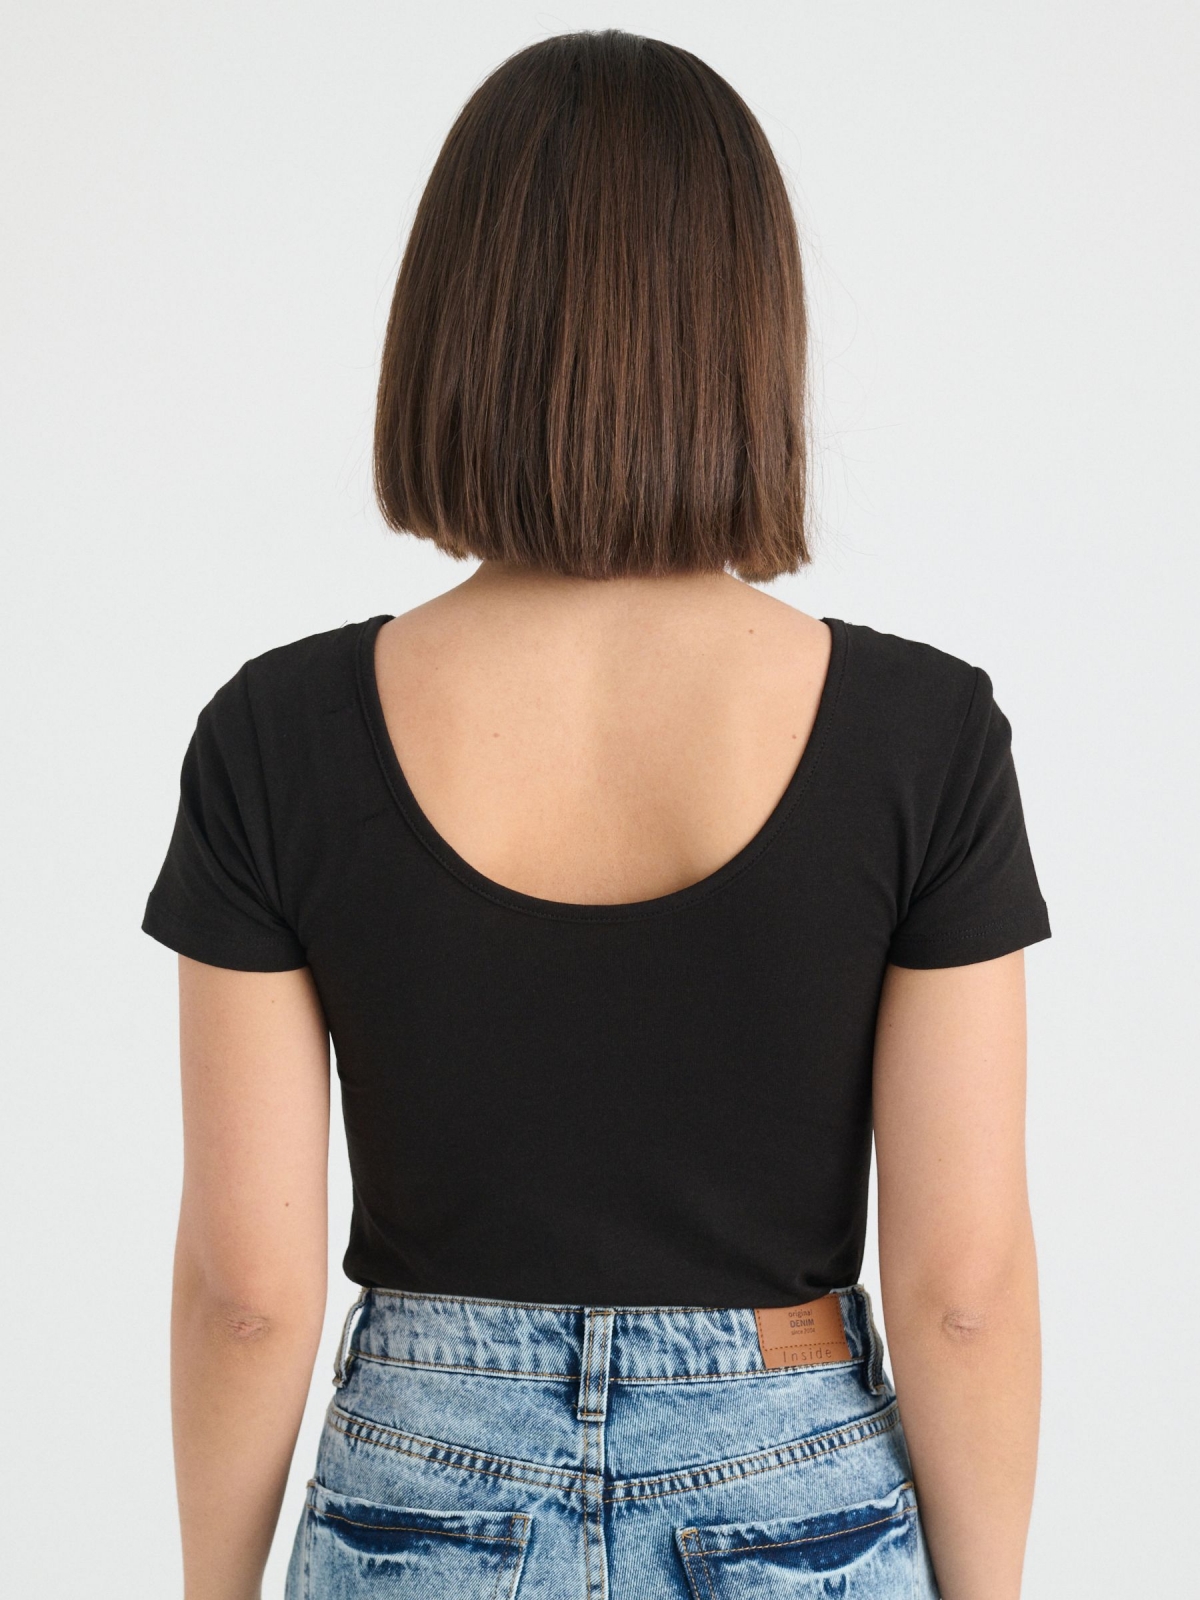 Lace up t-shirt black middle back view